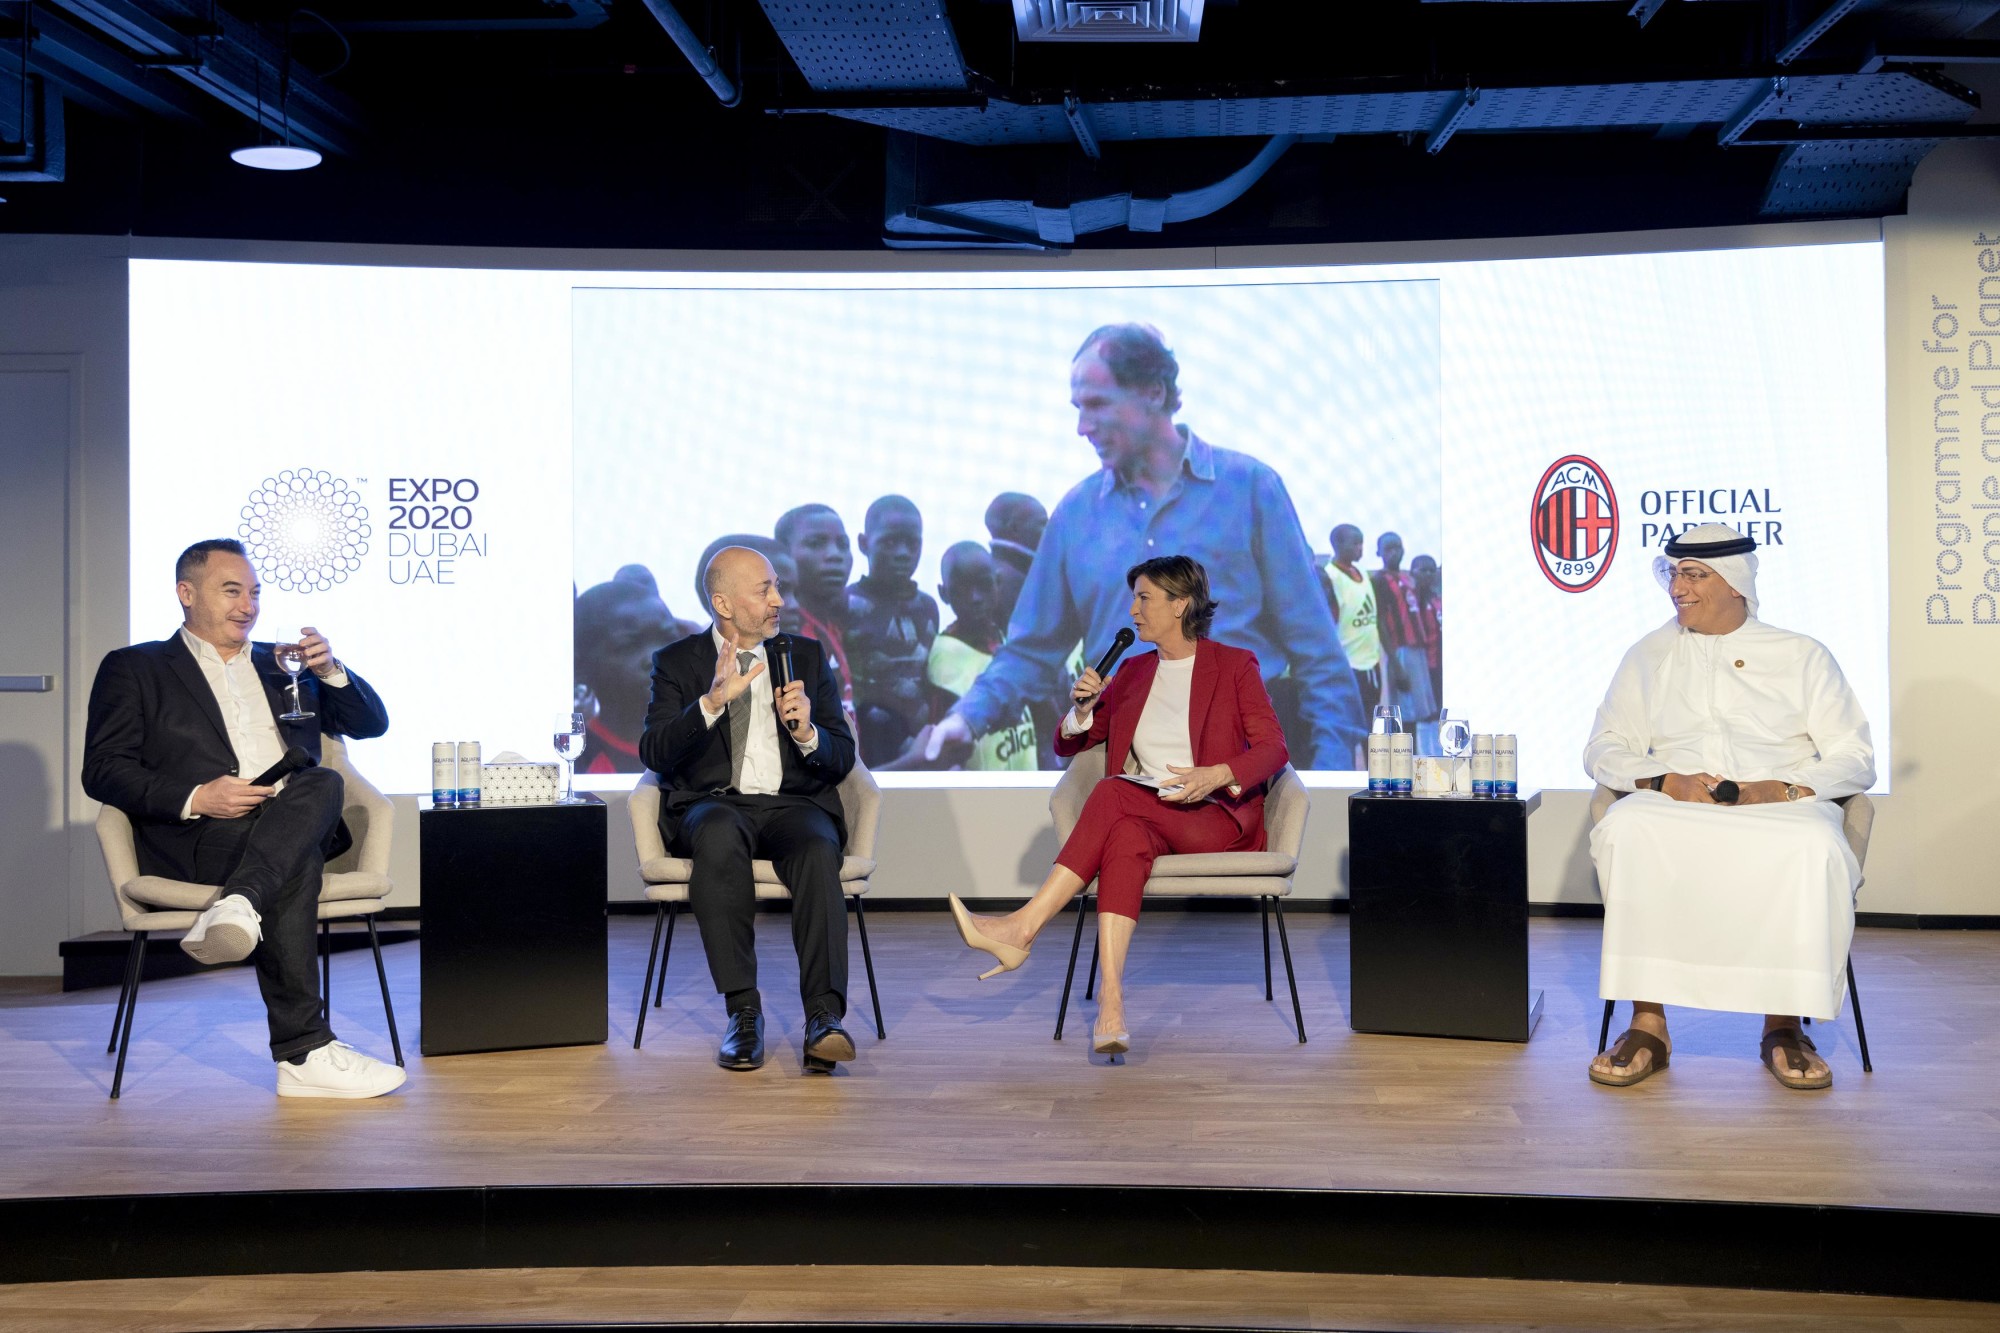 AC Milan Presents: The Future of Football and its Role in Society